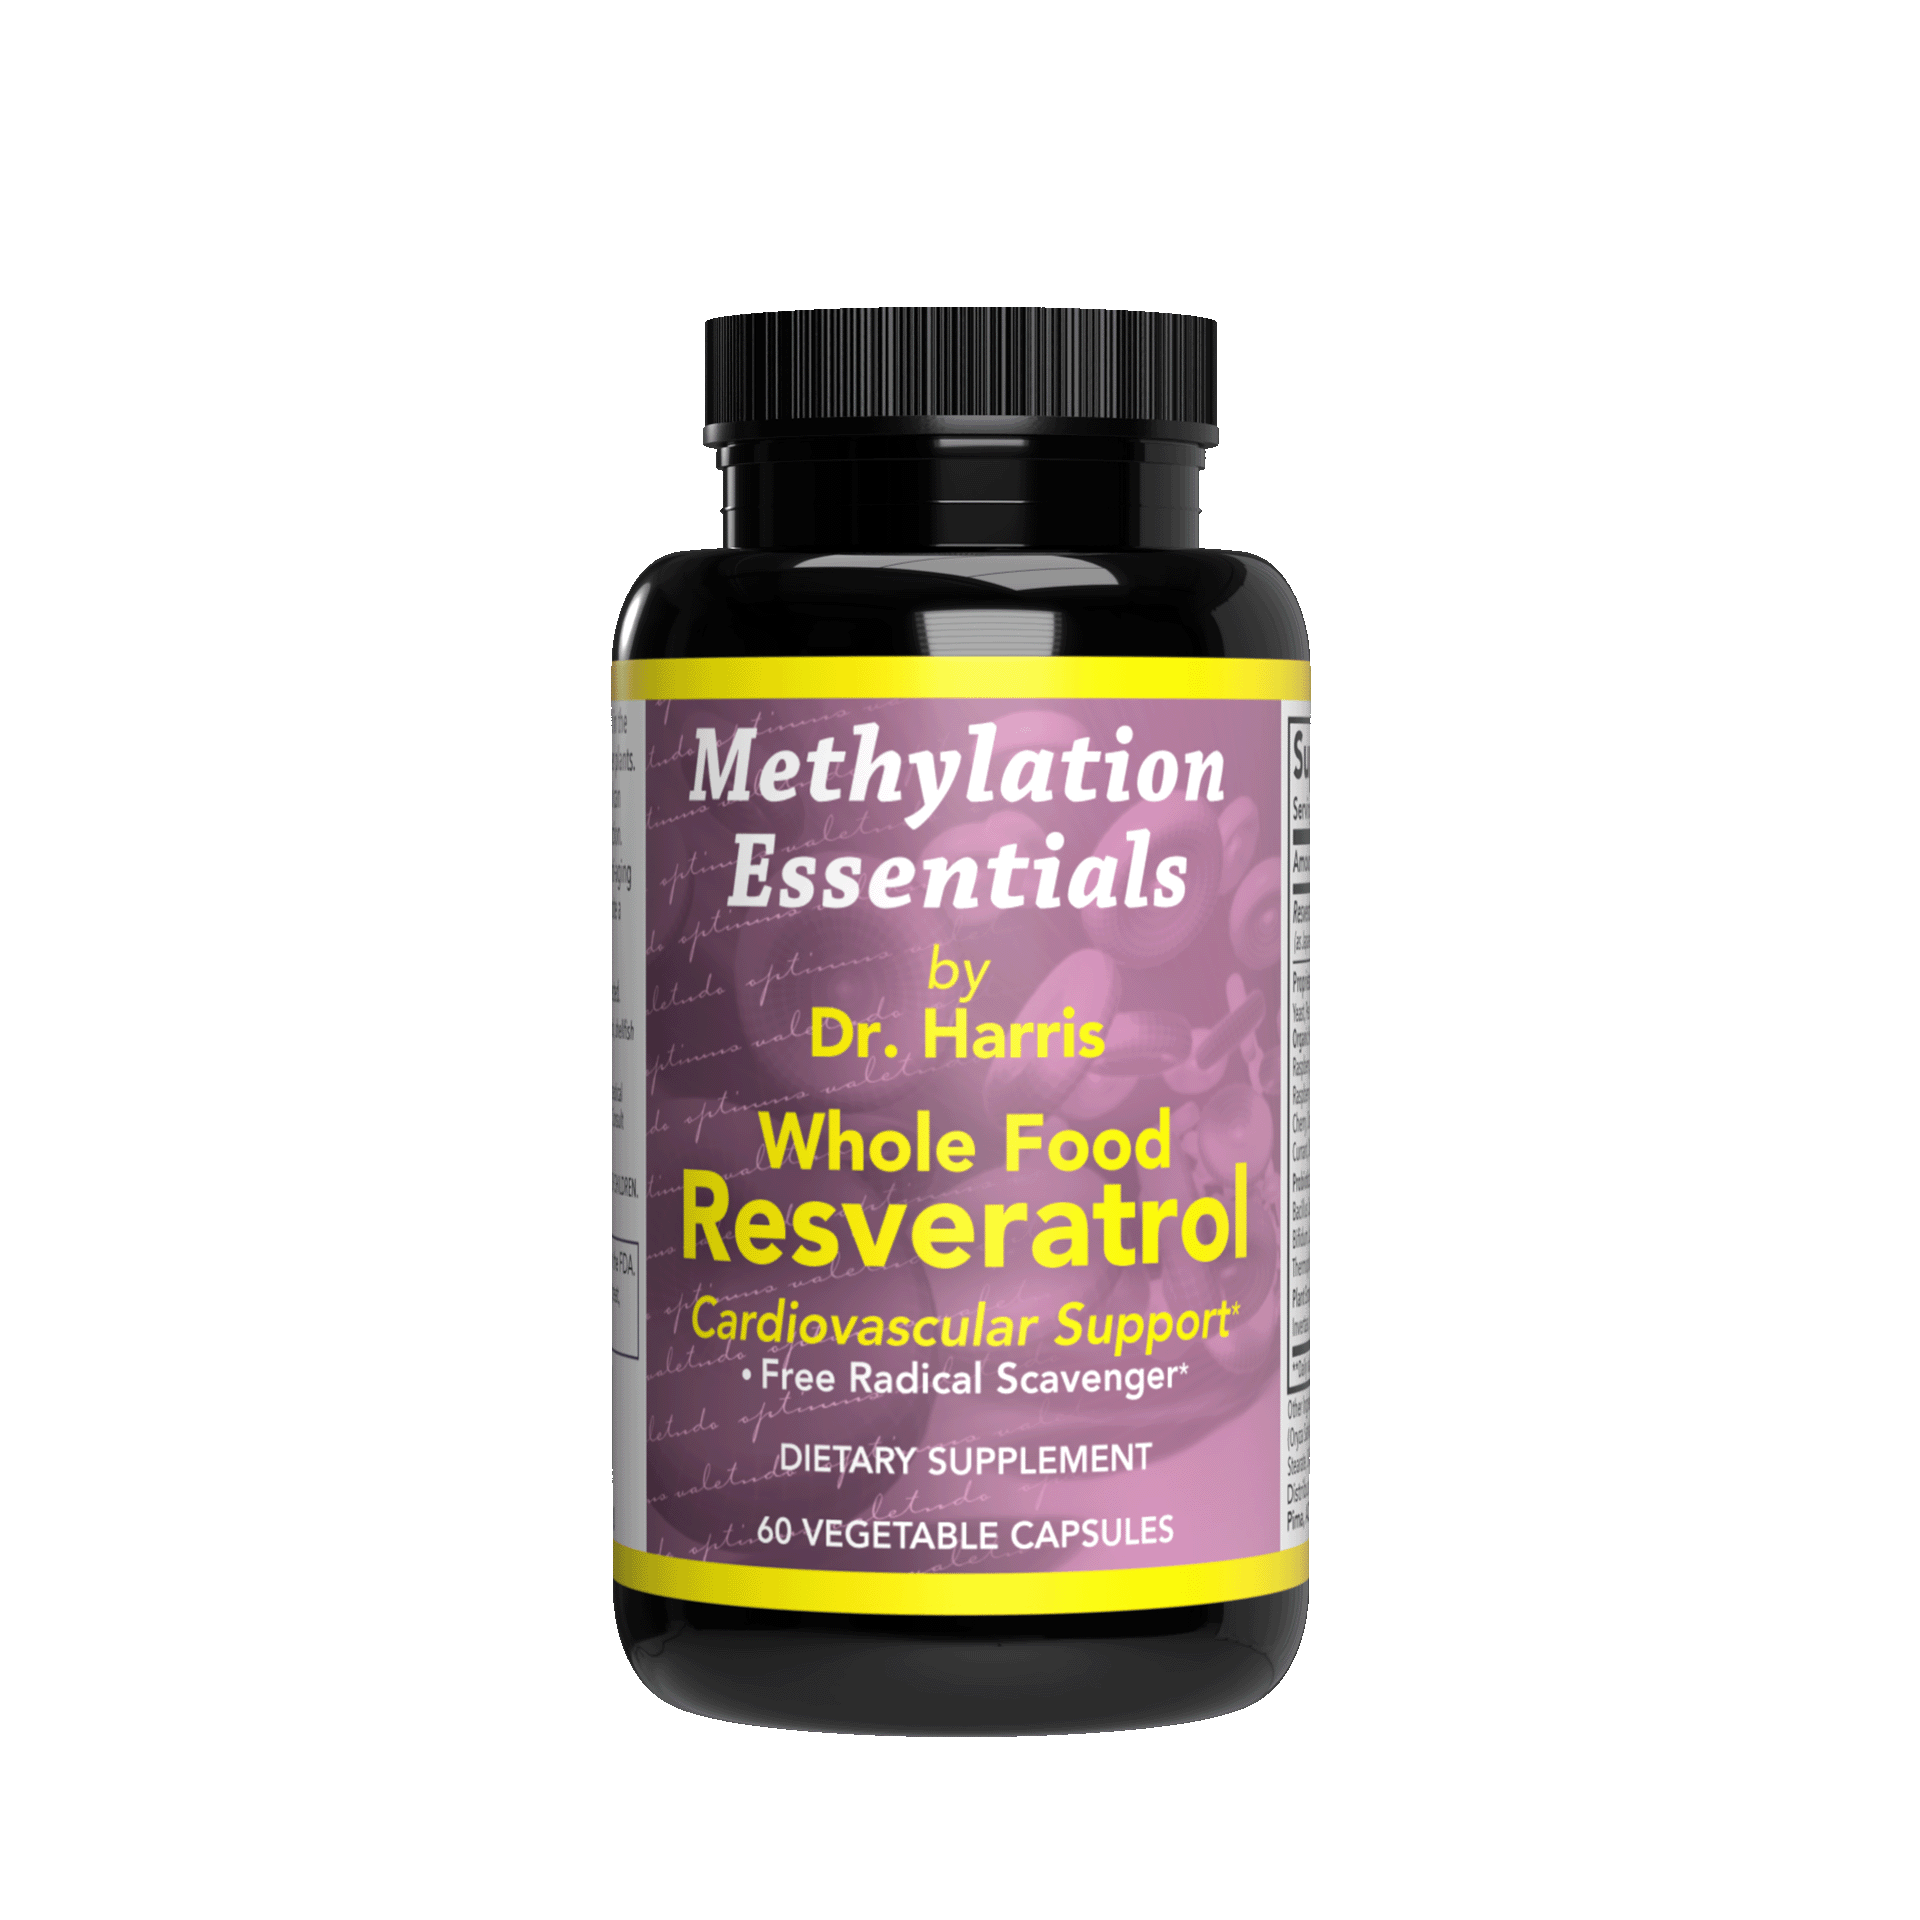 Image of a bottle of Essentials Resveratrol.